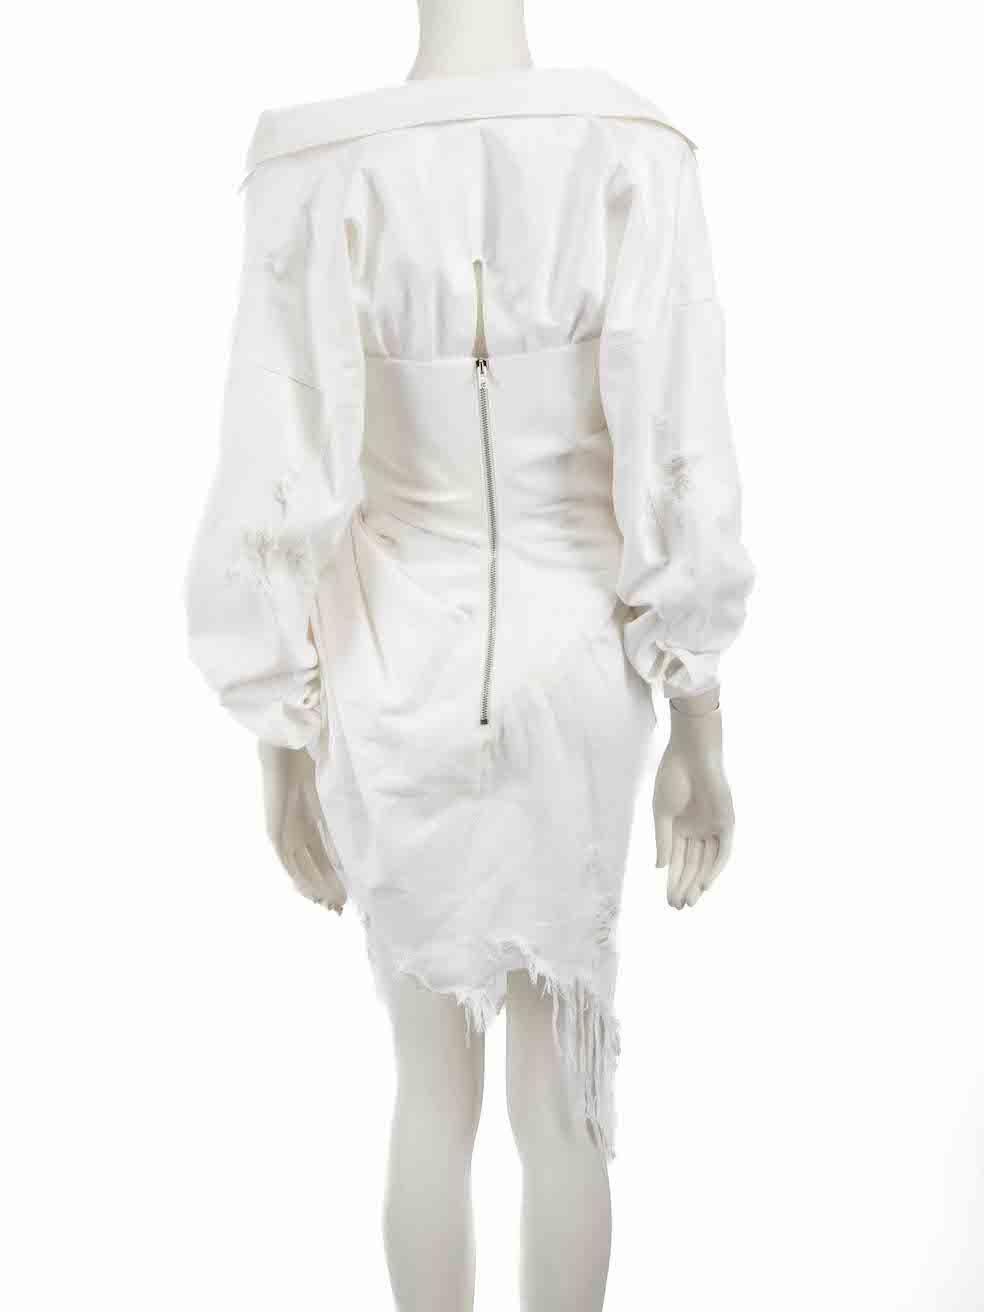 Alexander Wang White Asymmetric Distressed Dress Size S In Excellent Condition For Sale In London, GB